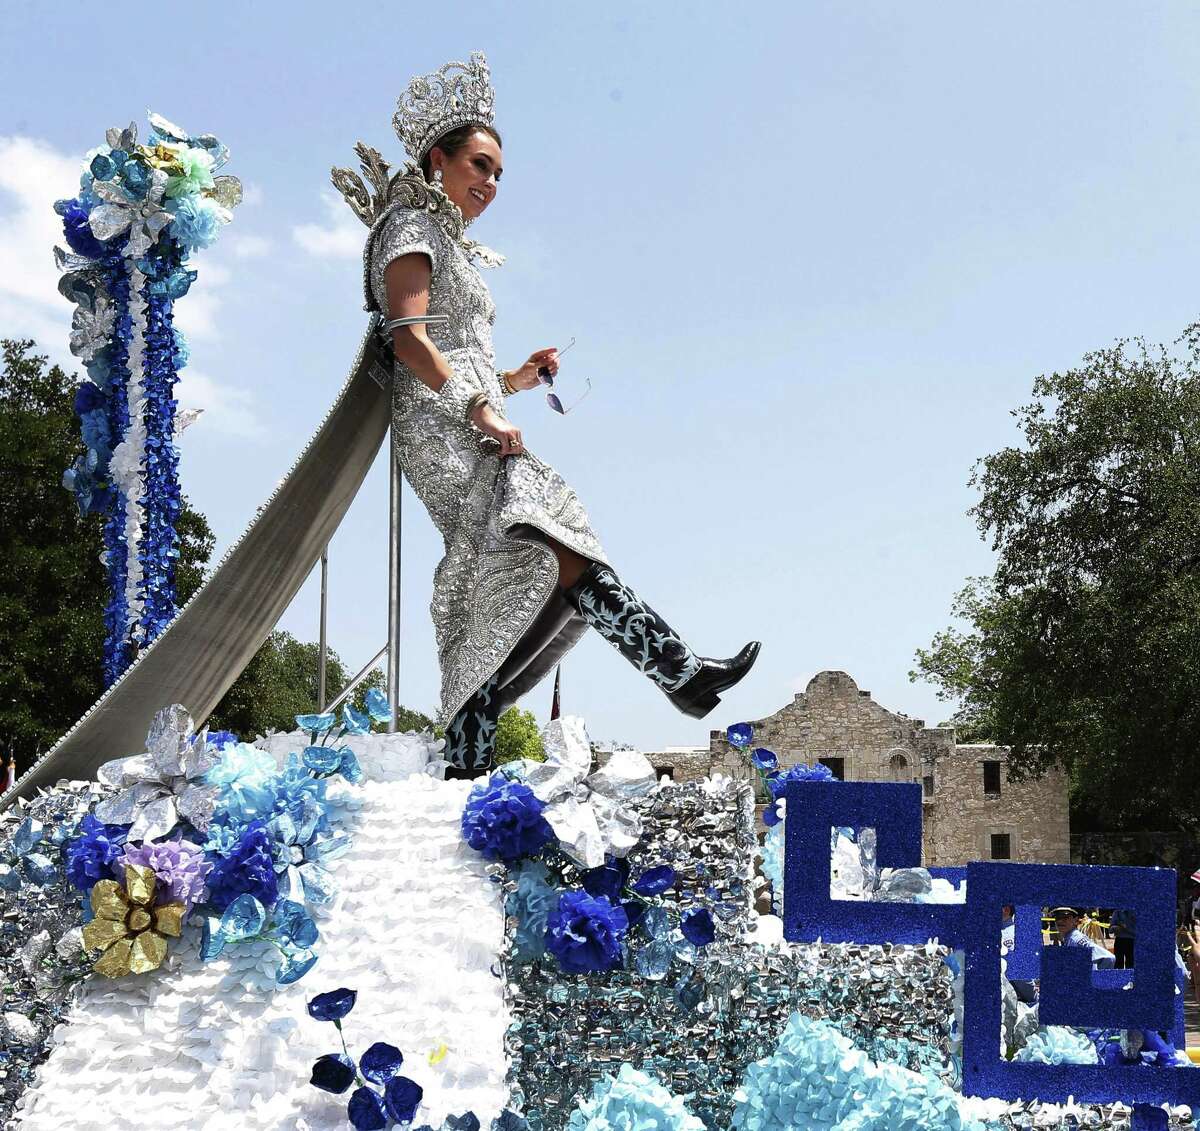 Frances Carolina Roberts, Princess of the Splendors of the Rio de la Plata, shows her boots for the crowd as her float passes by the Alamo during the 2017 Battle of Flowers parade on Friday, Apr. 28, 2017. (Kin Man Hui/San Antonio Express-News)